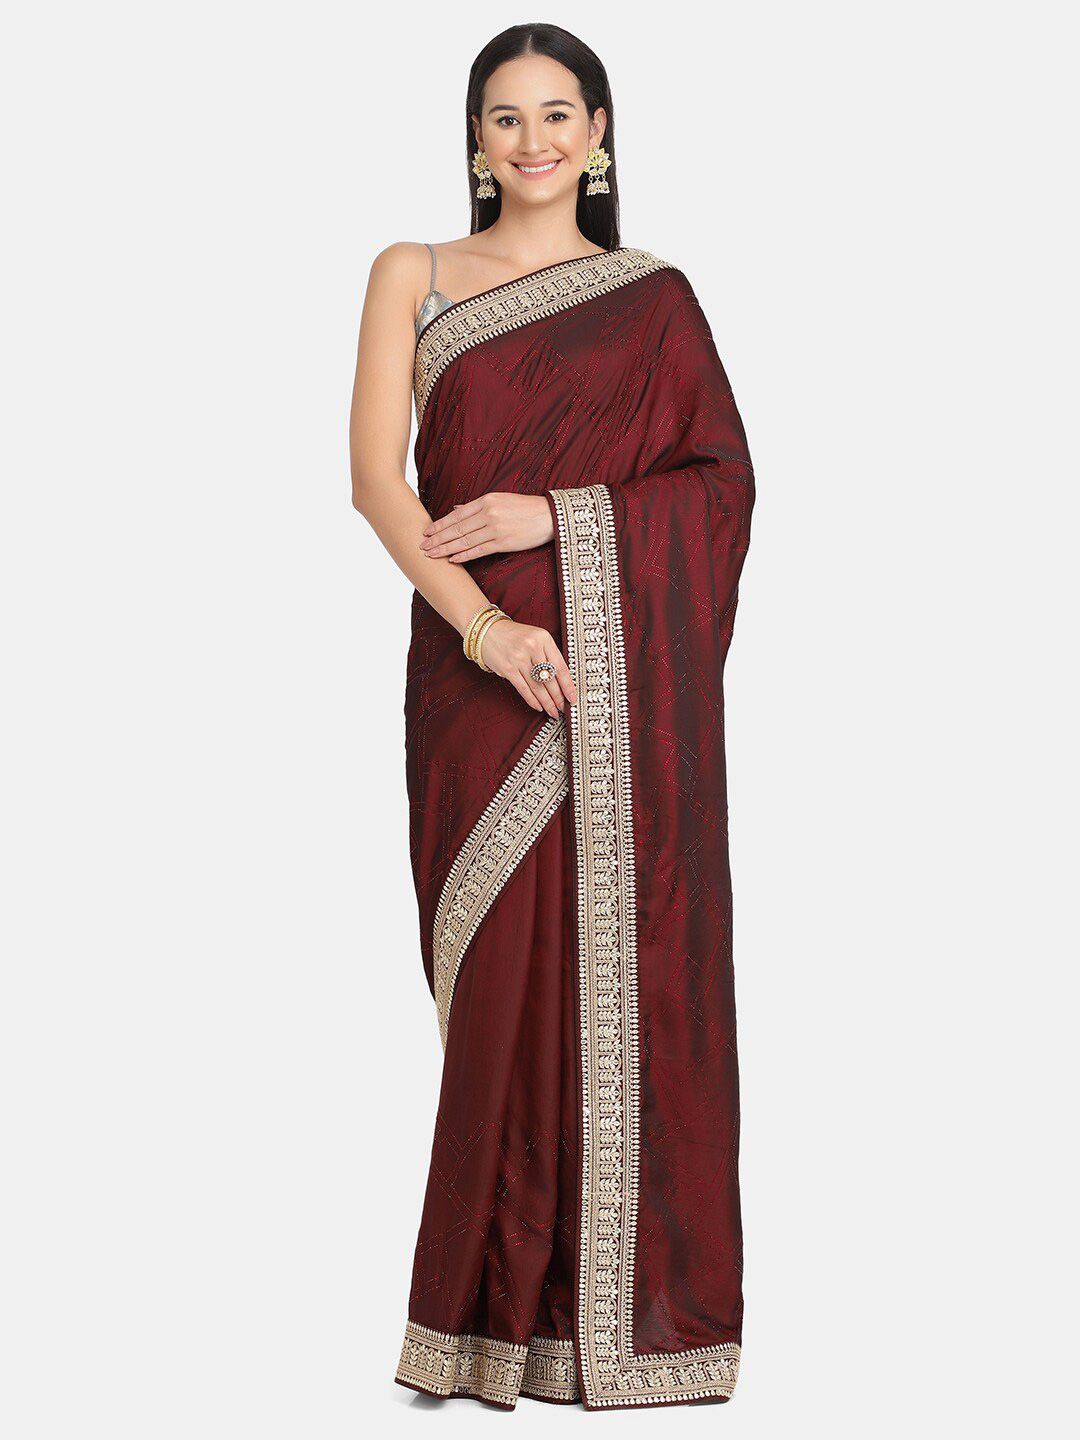 BOMBAY SELECTIONS Maroo Embellished Pure Crepe Saree Price in India